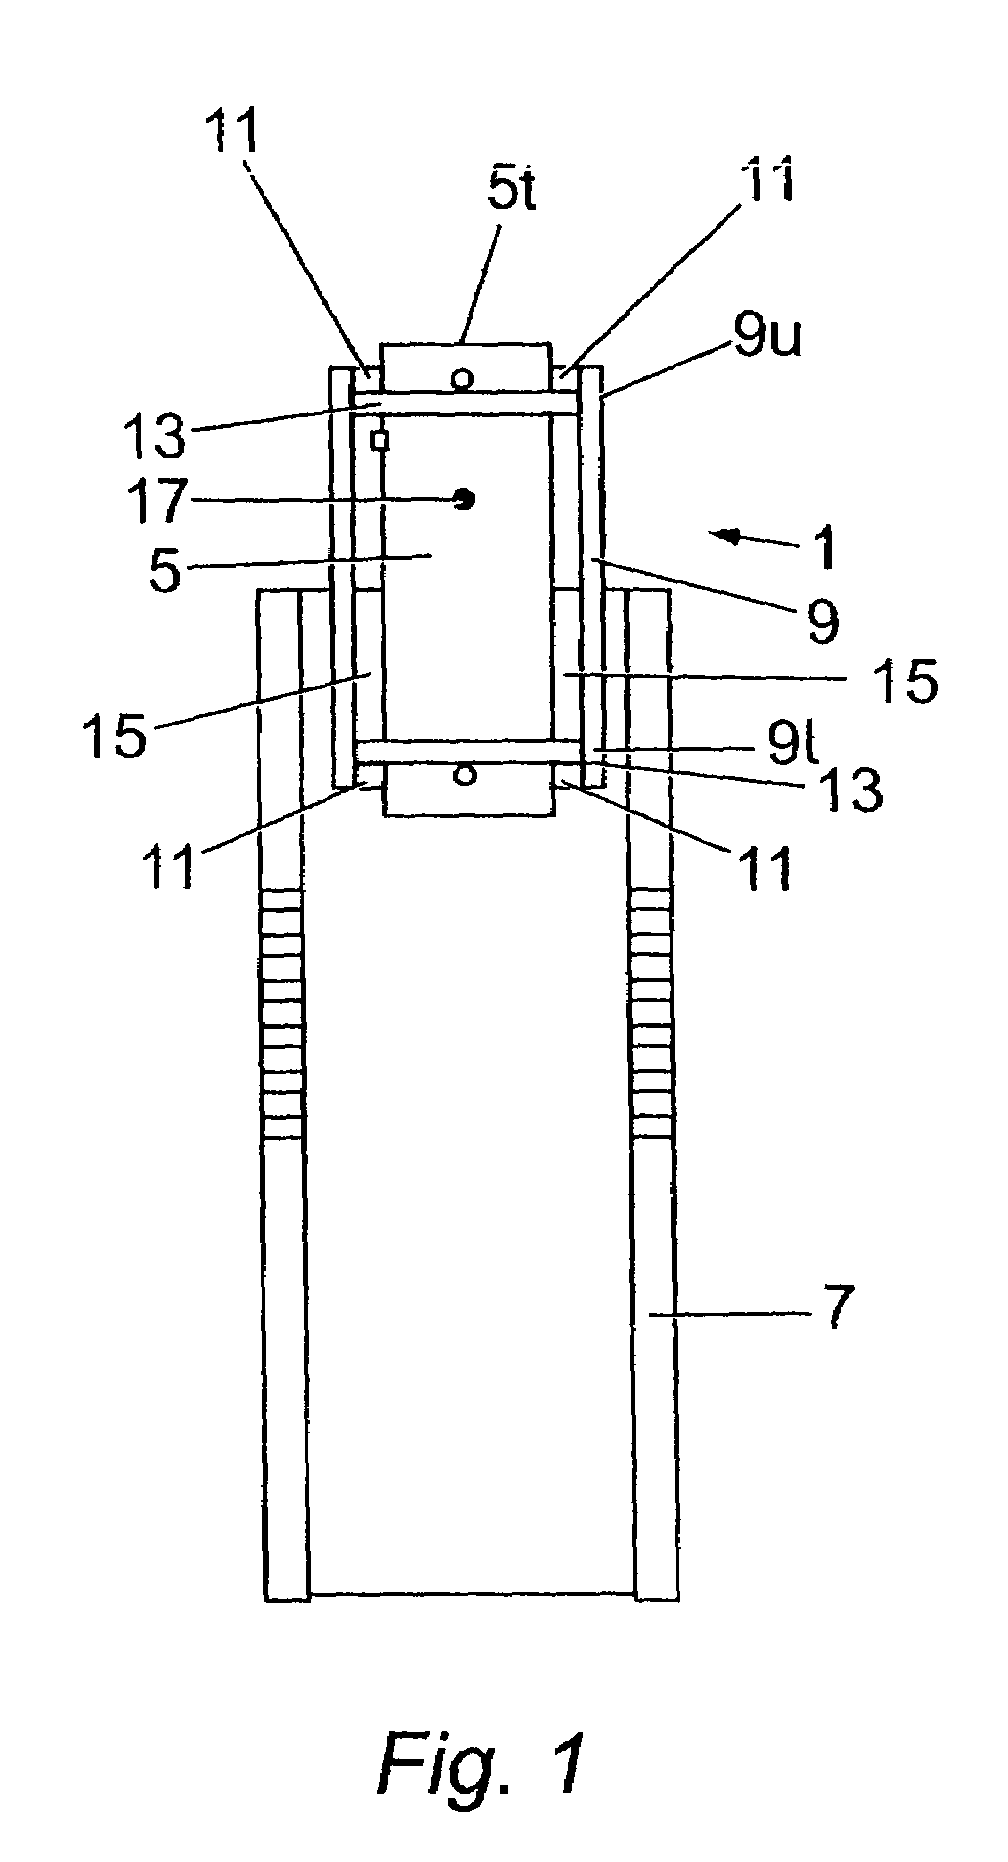 Apparatus and method for expanding and fixing a tubular member within another tubular member, a liner or a borehole